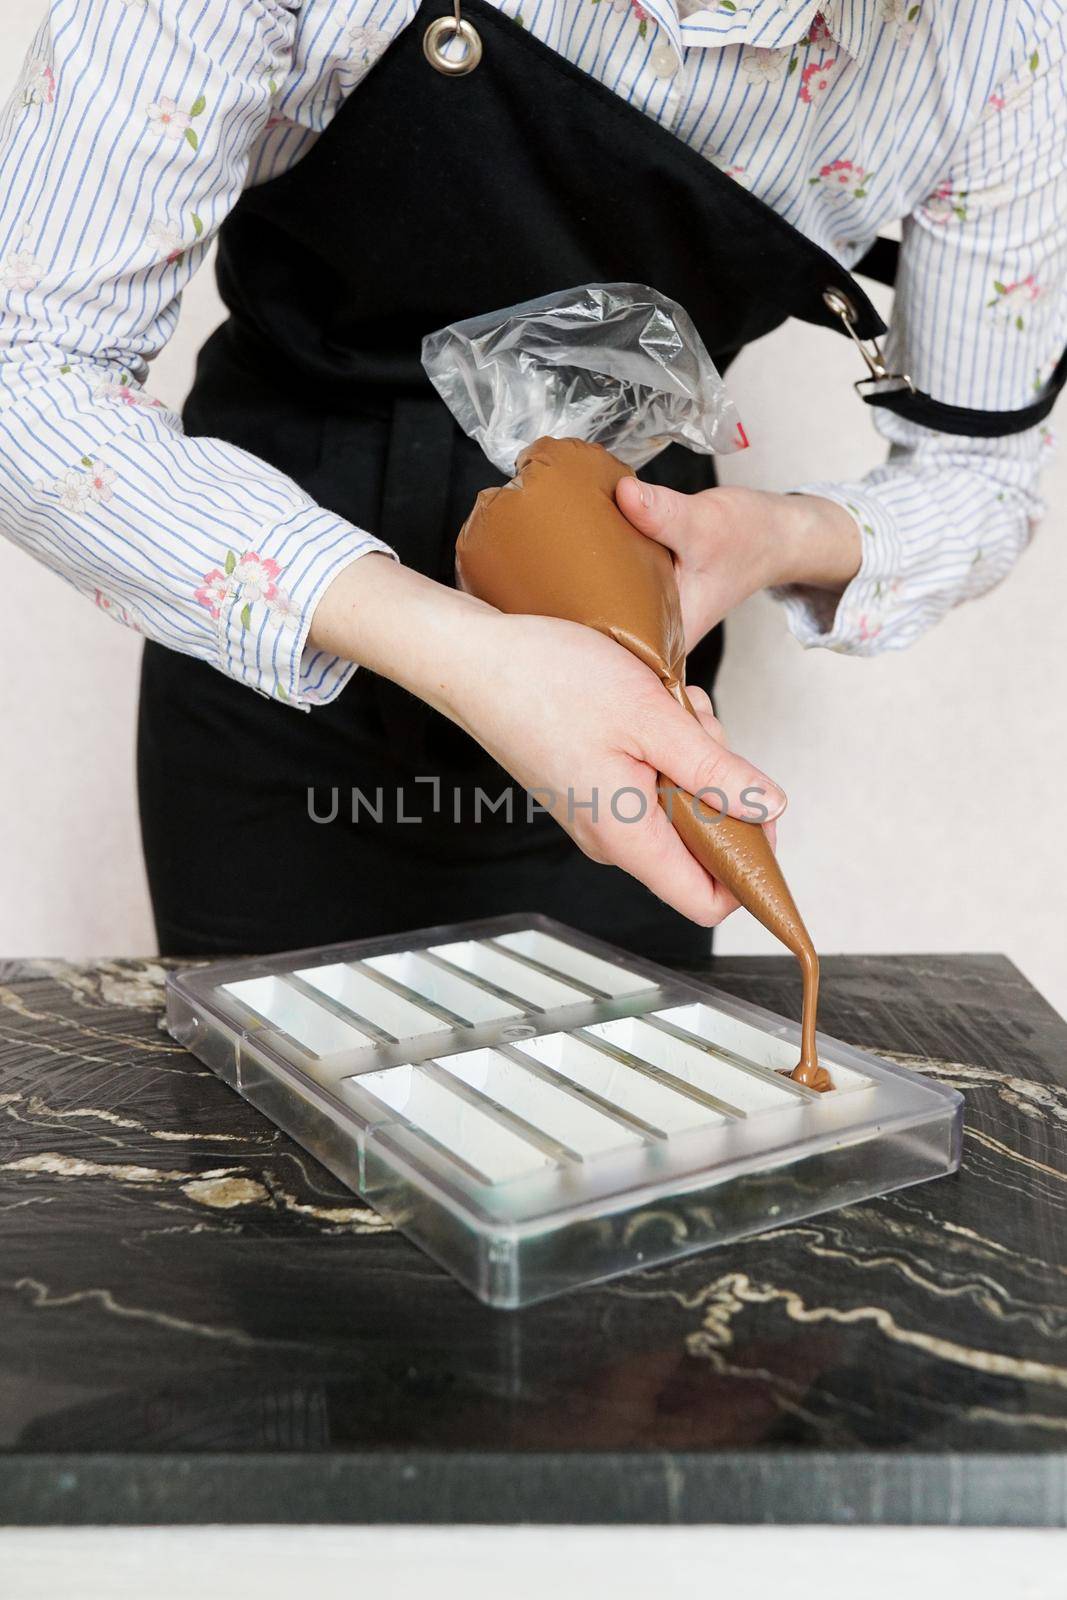 Chocolatier pours chocolate into molds. Chef using pastry bag filling hot melt chocolate into mold. Concept for making homemade chocolate dessert